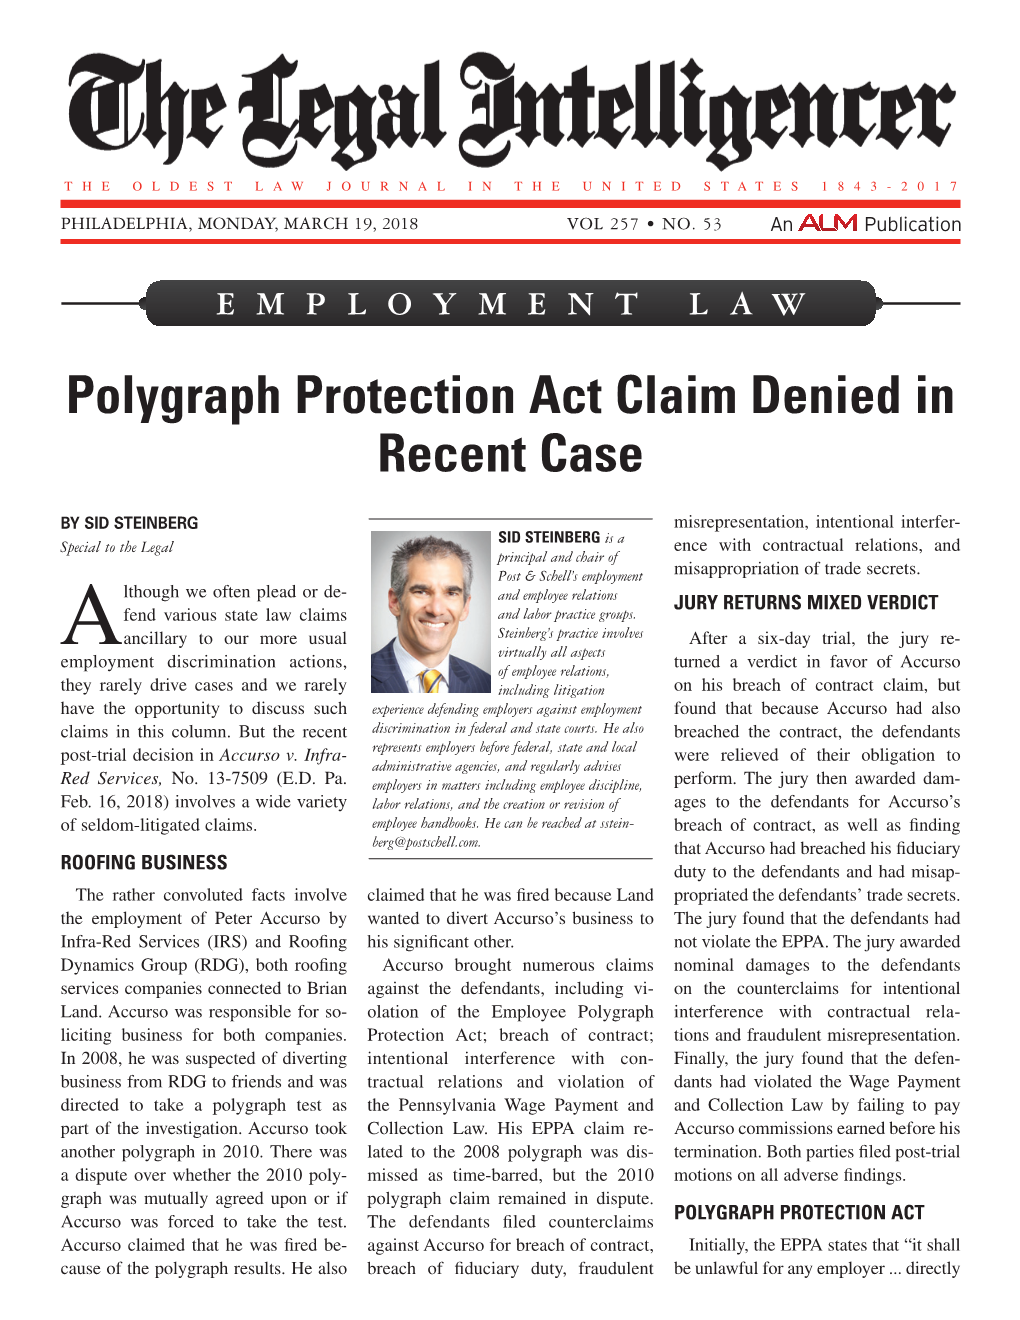 Polygraph Protection Act Claim Denied in Recent Case